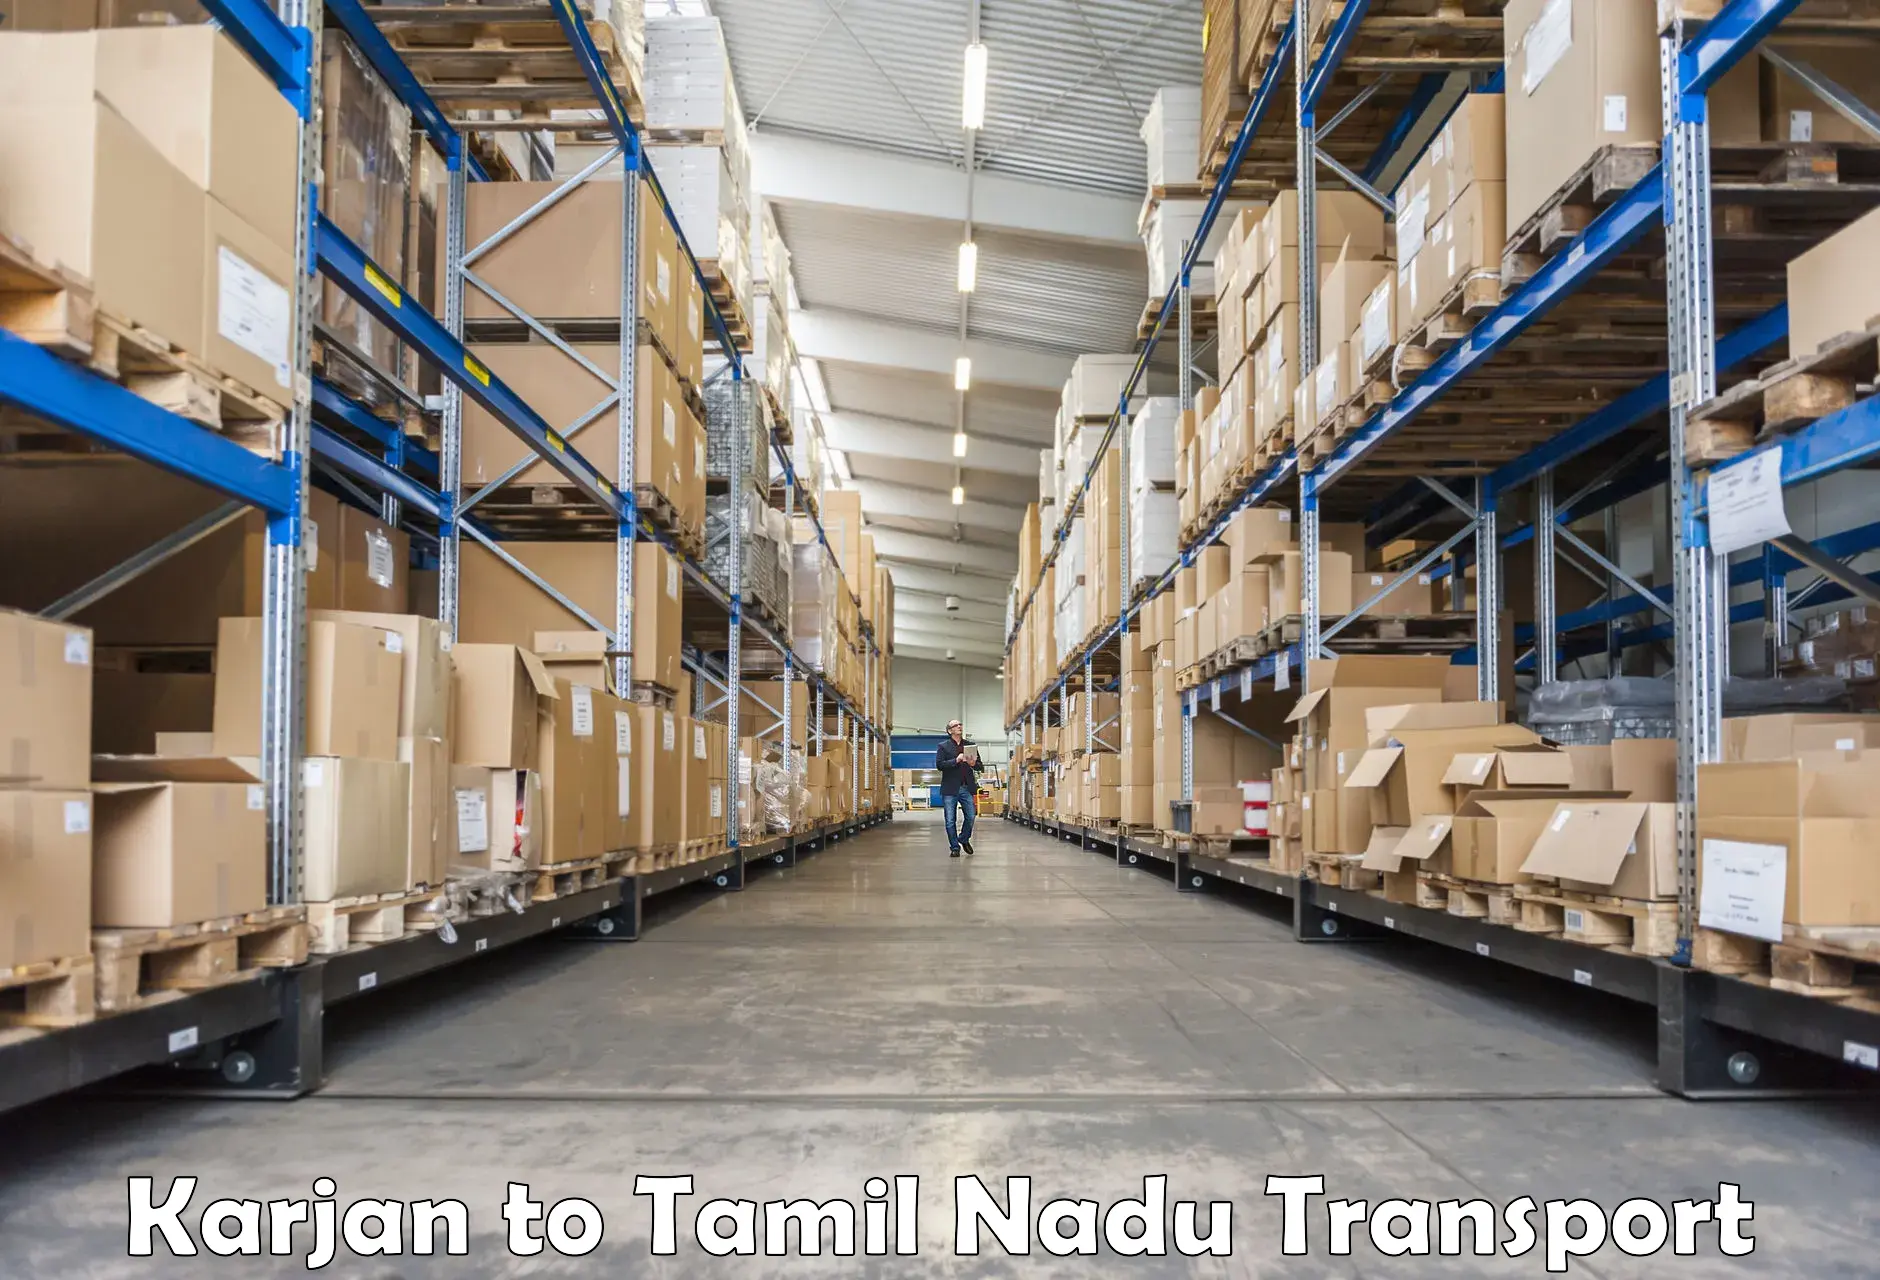 Transport bike from one state to another Karjan to Tamil Nadu